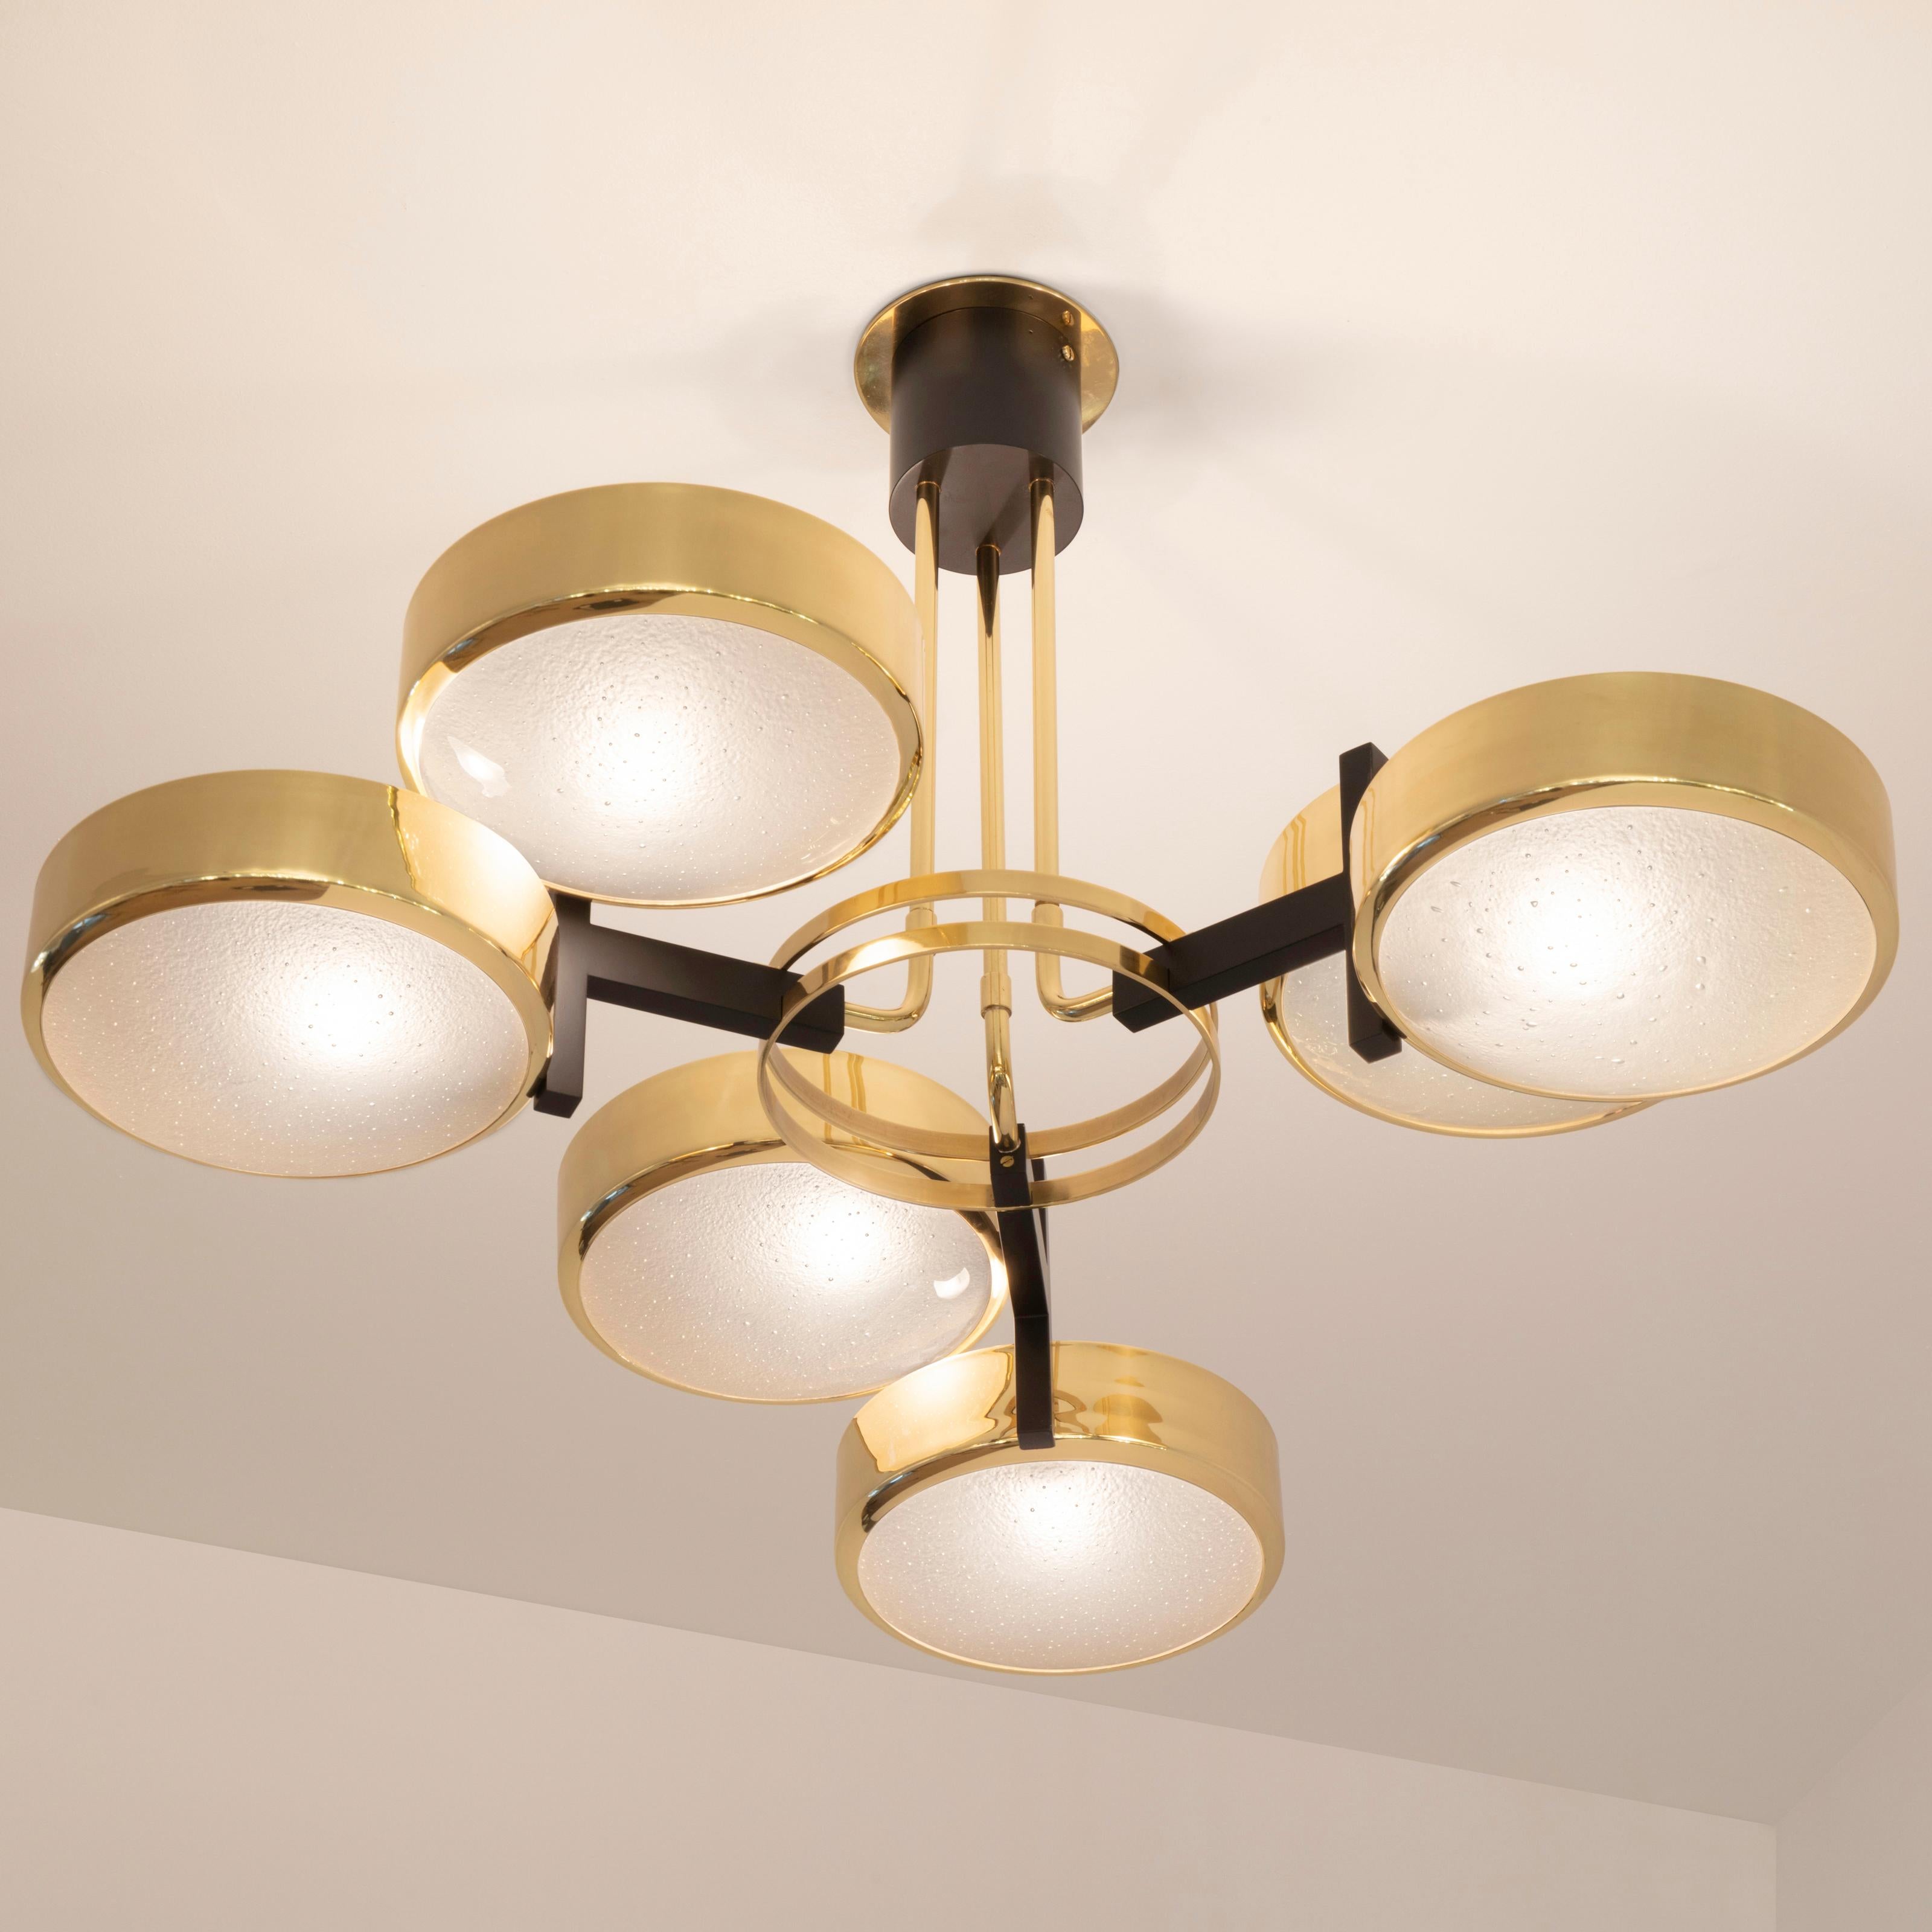 Brass Eclissi Ceiling Light by Gaspare Asaro-Polished Nickel and Black Finish For Sale